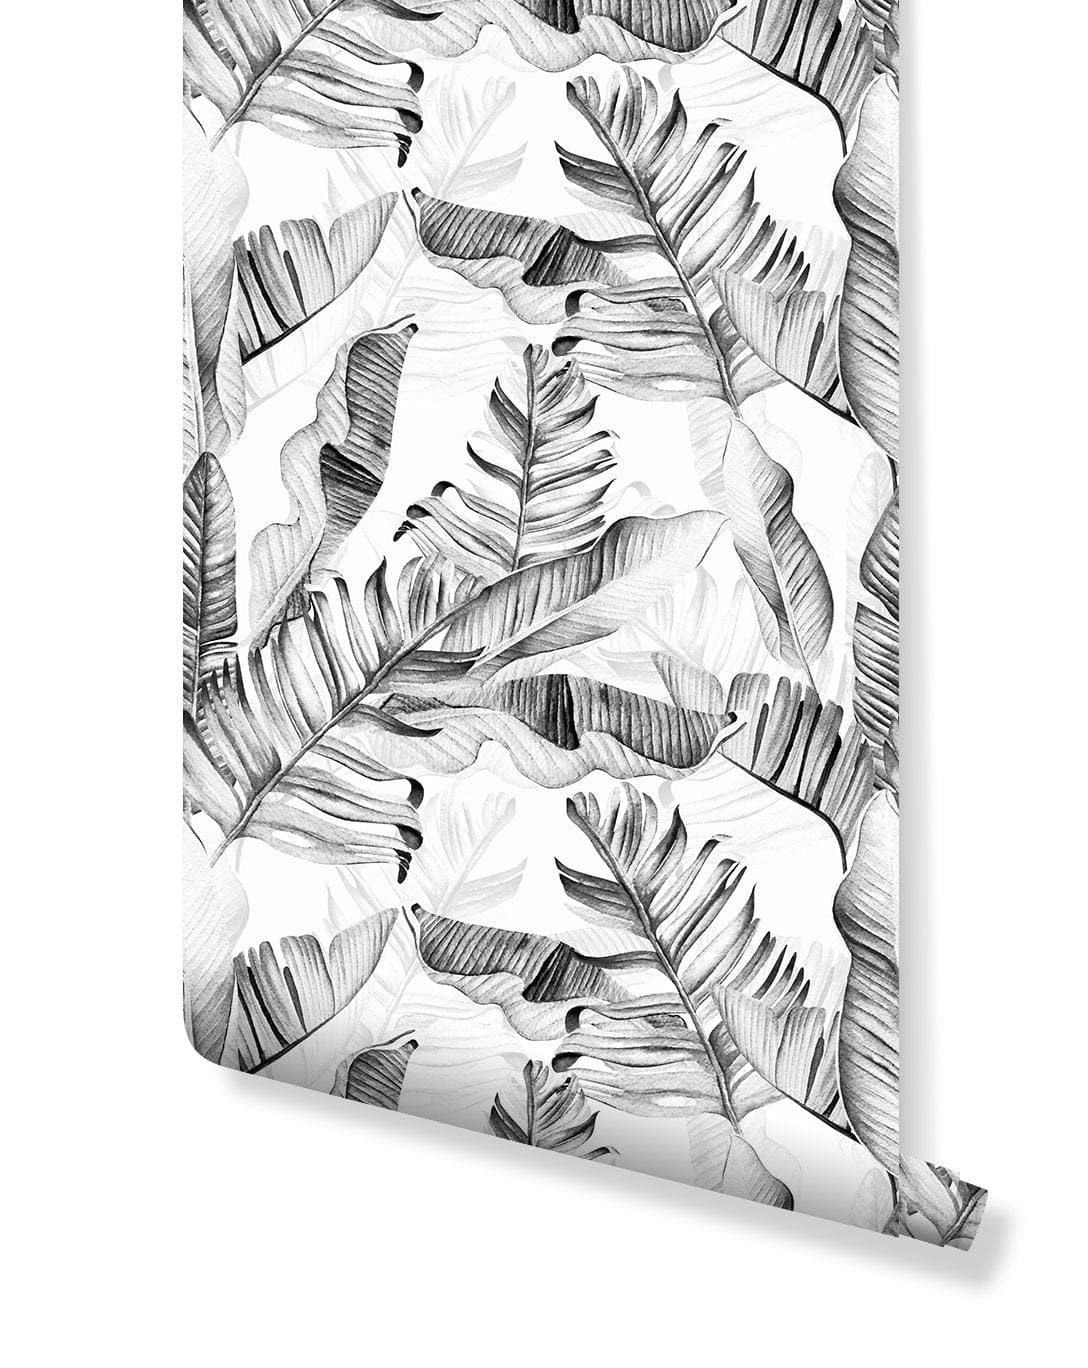 Black and White Watercolor Tropical Palm Leaves Wallpaper Black and White Watercolor Tropical Palm Leaves Wallpaper Black and White Watercolor Tropical Palm Leaves Wallpaper 